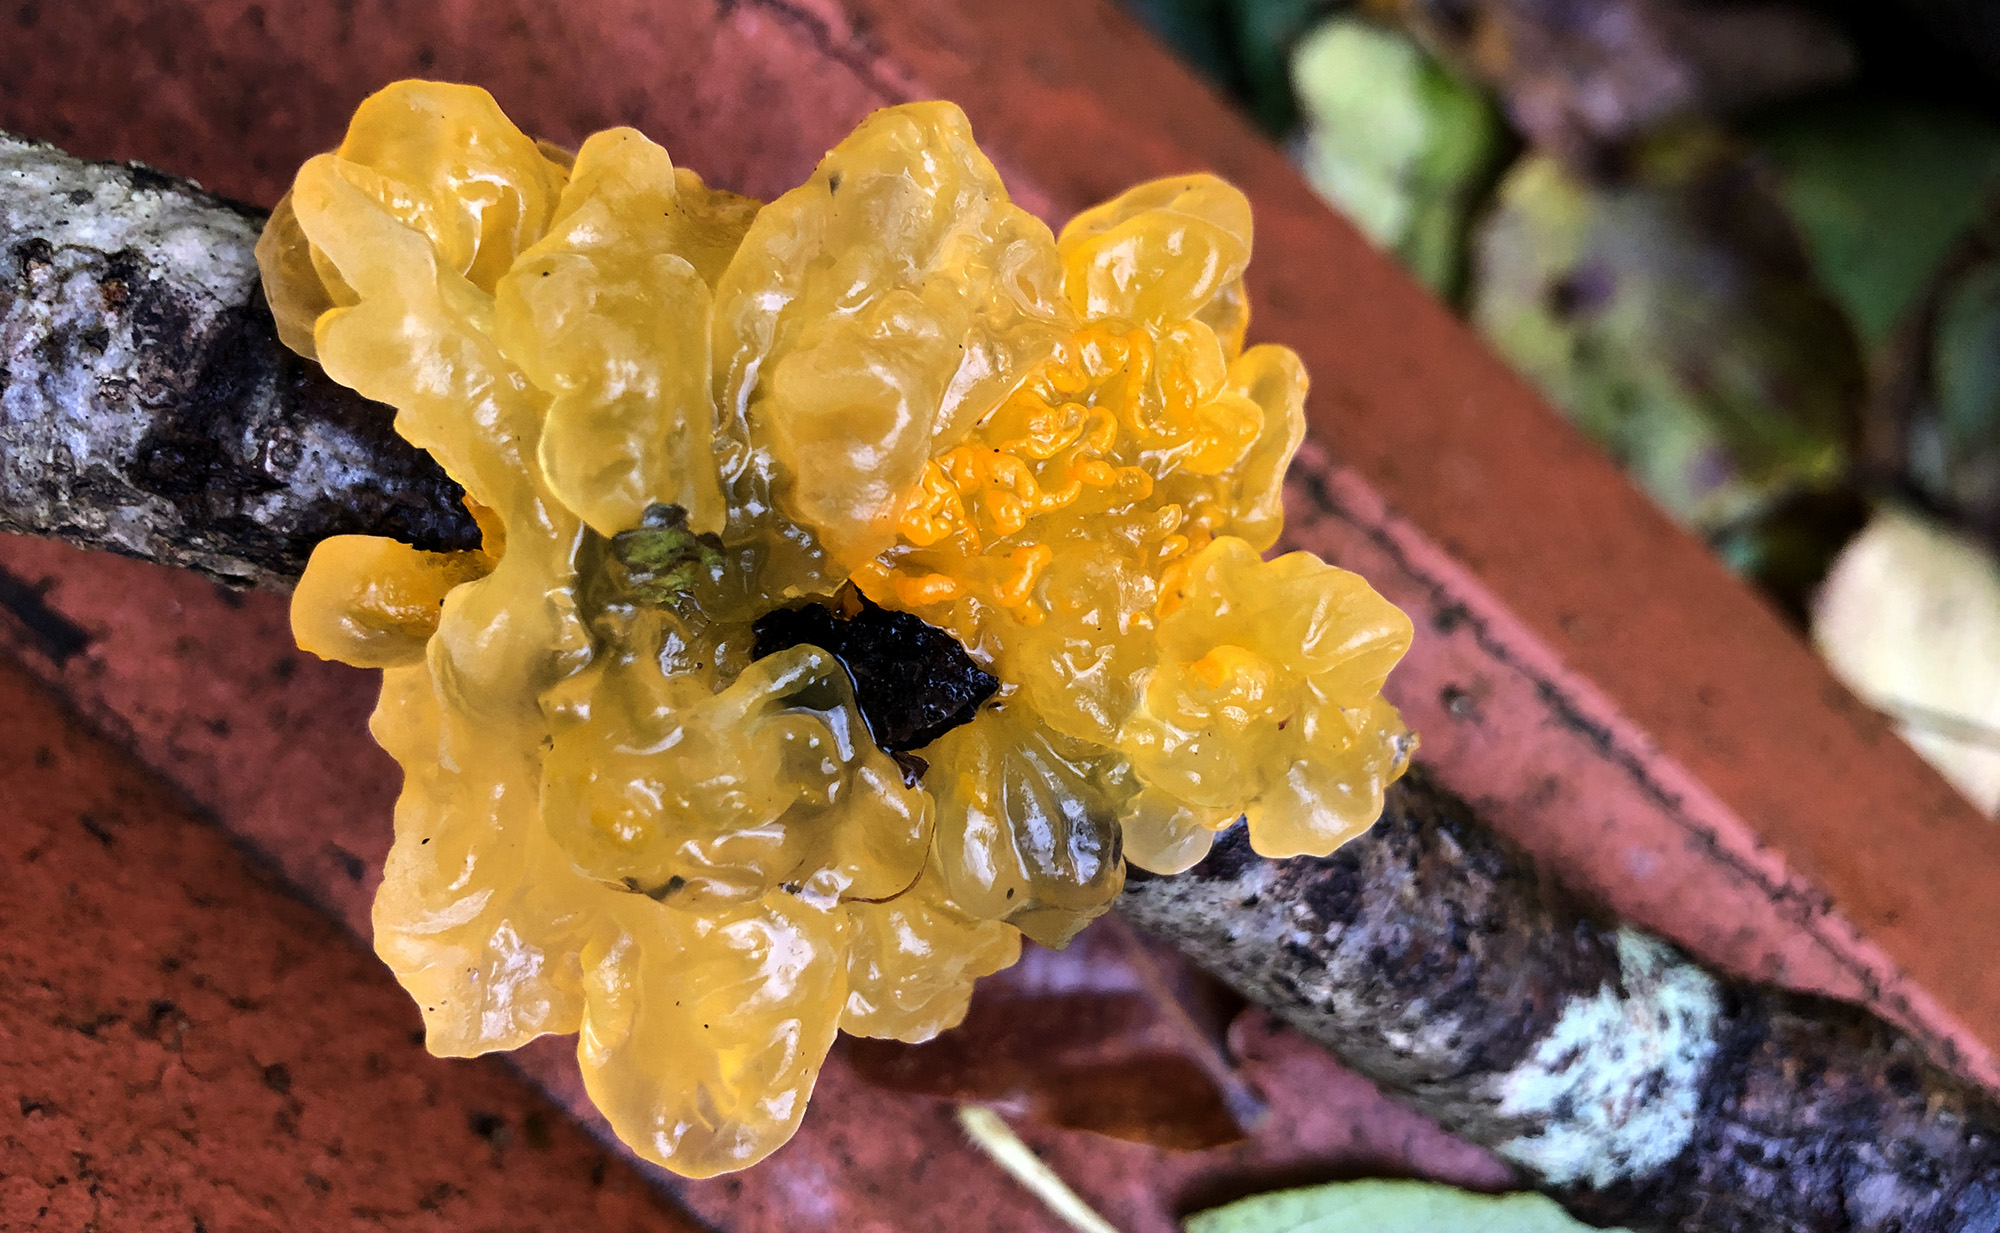 A yellow translucent mass of 'Witches Butter' fungus clings to a large twig.